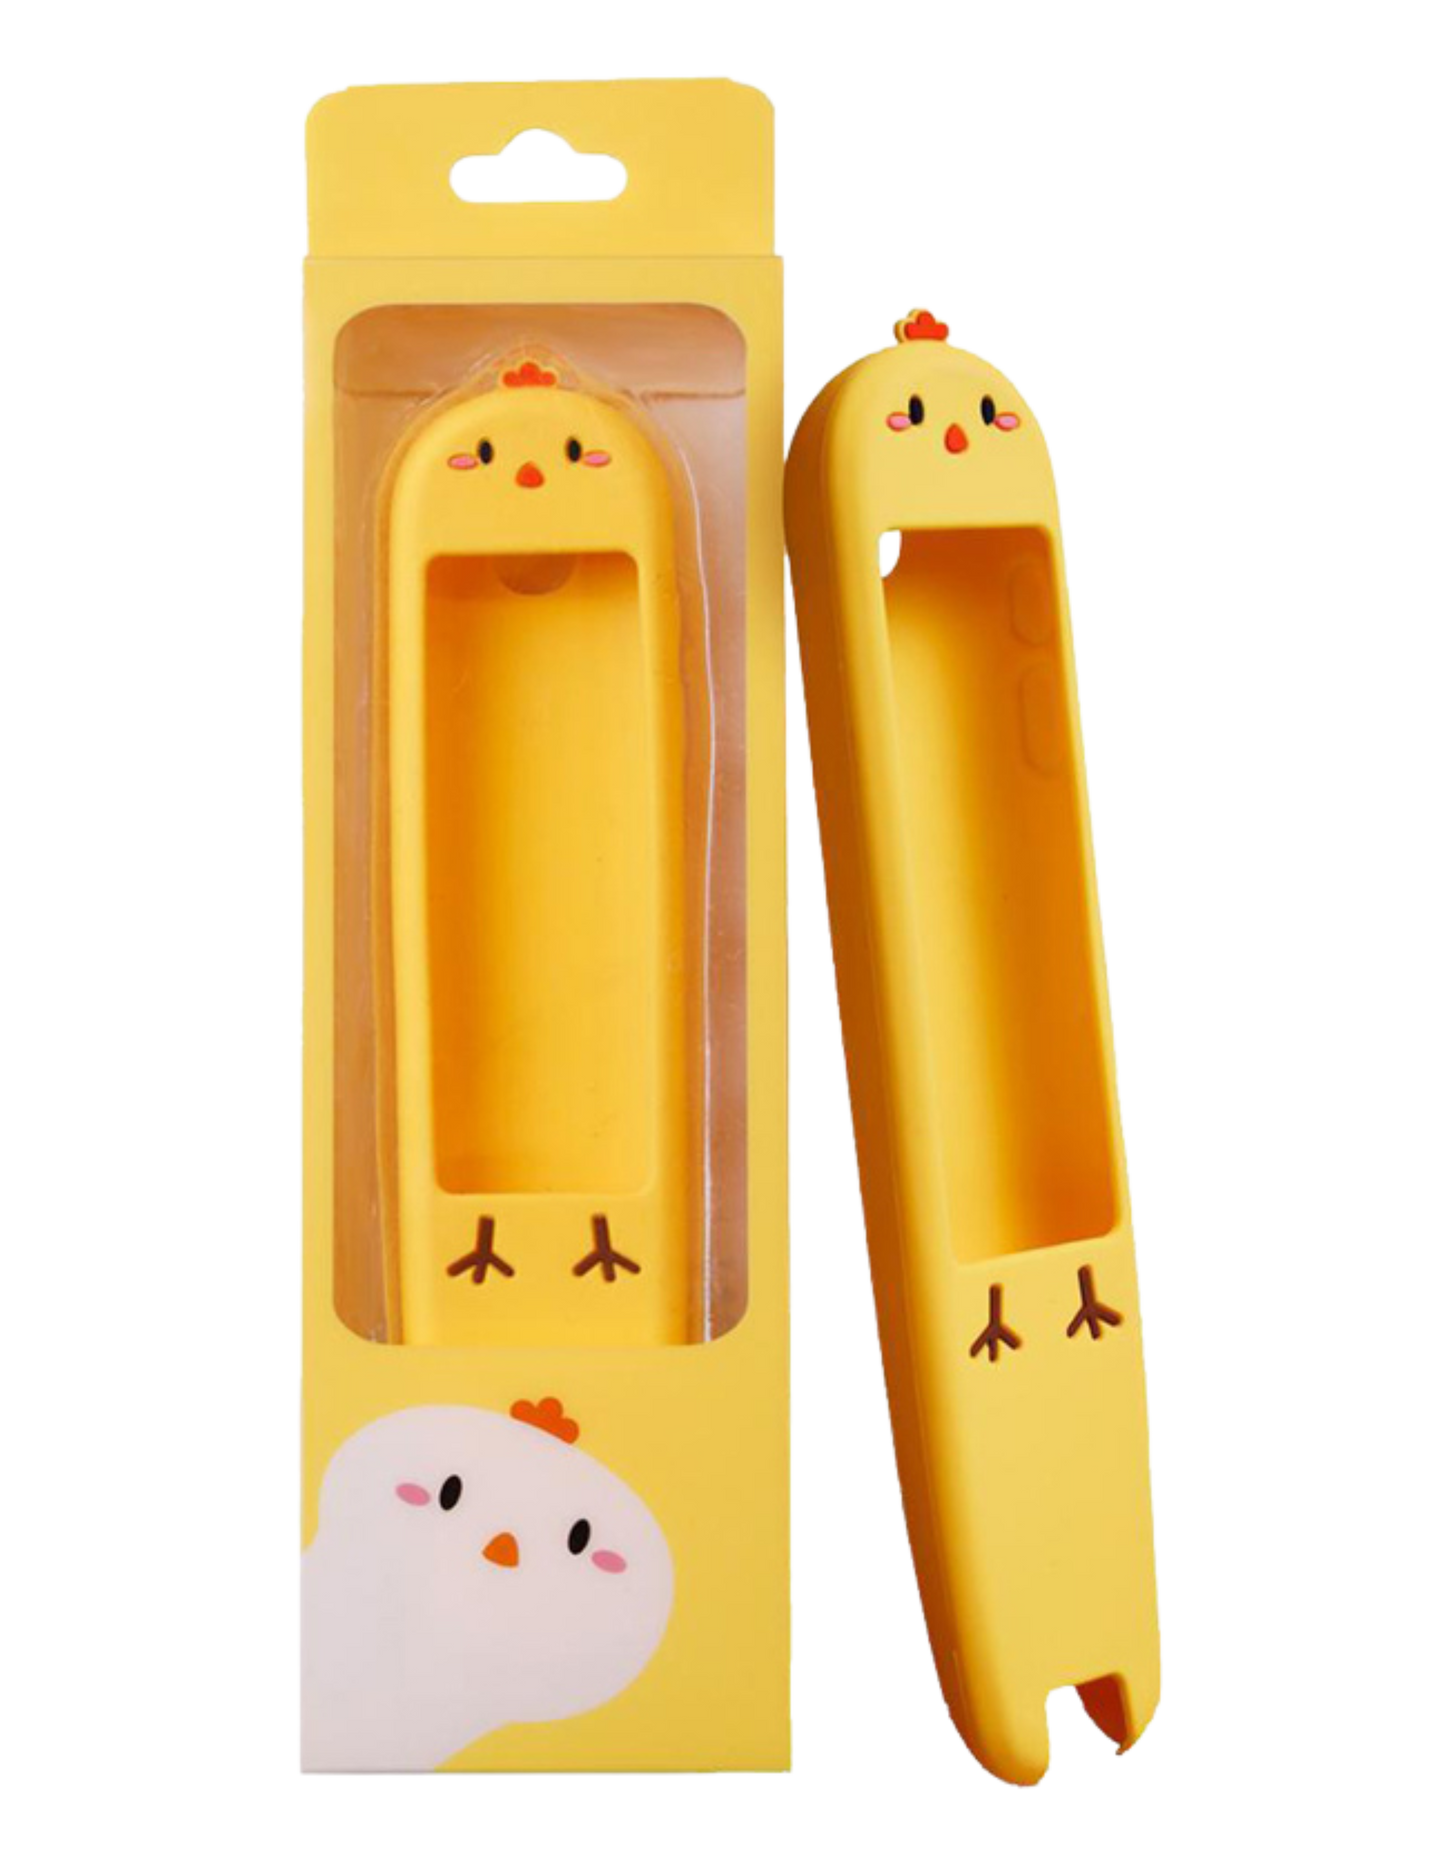 Youdao Pen 3 Protective Silicone Case Yellow Chick